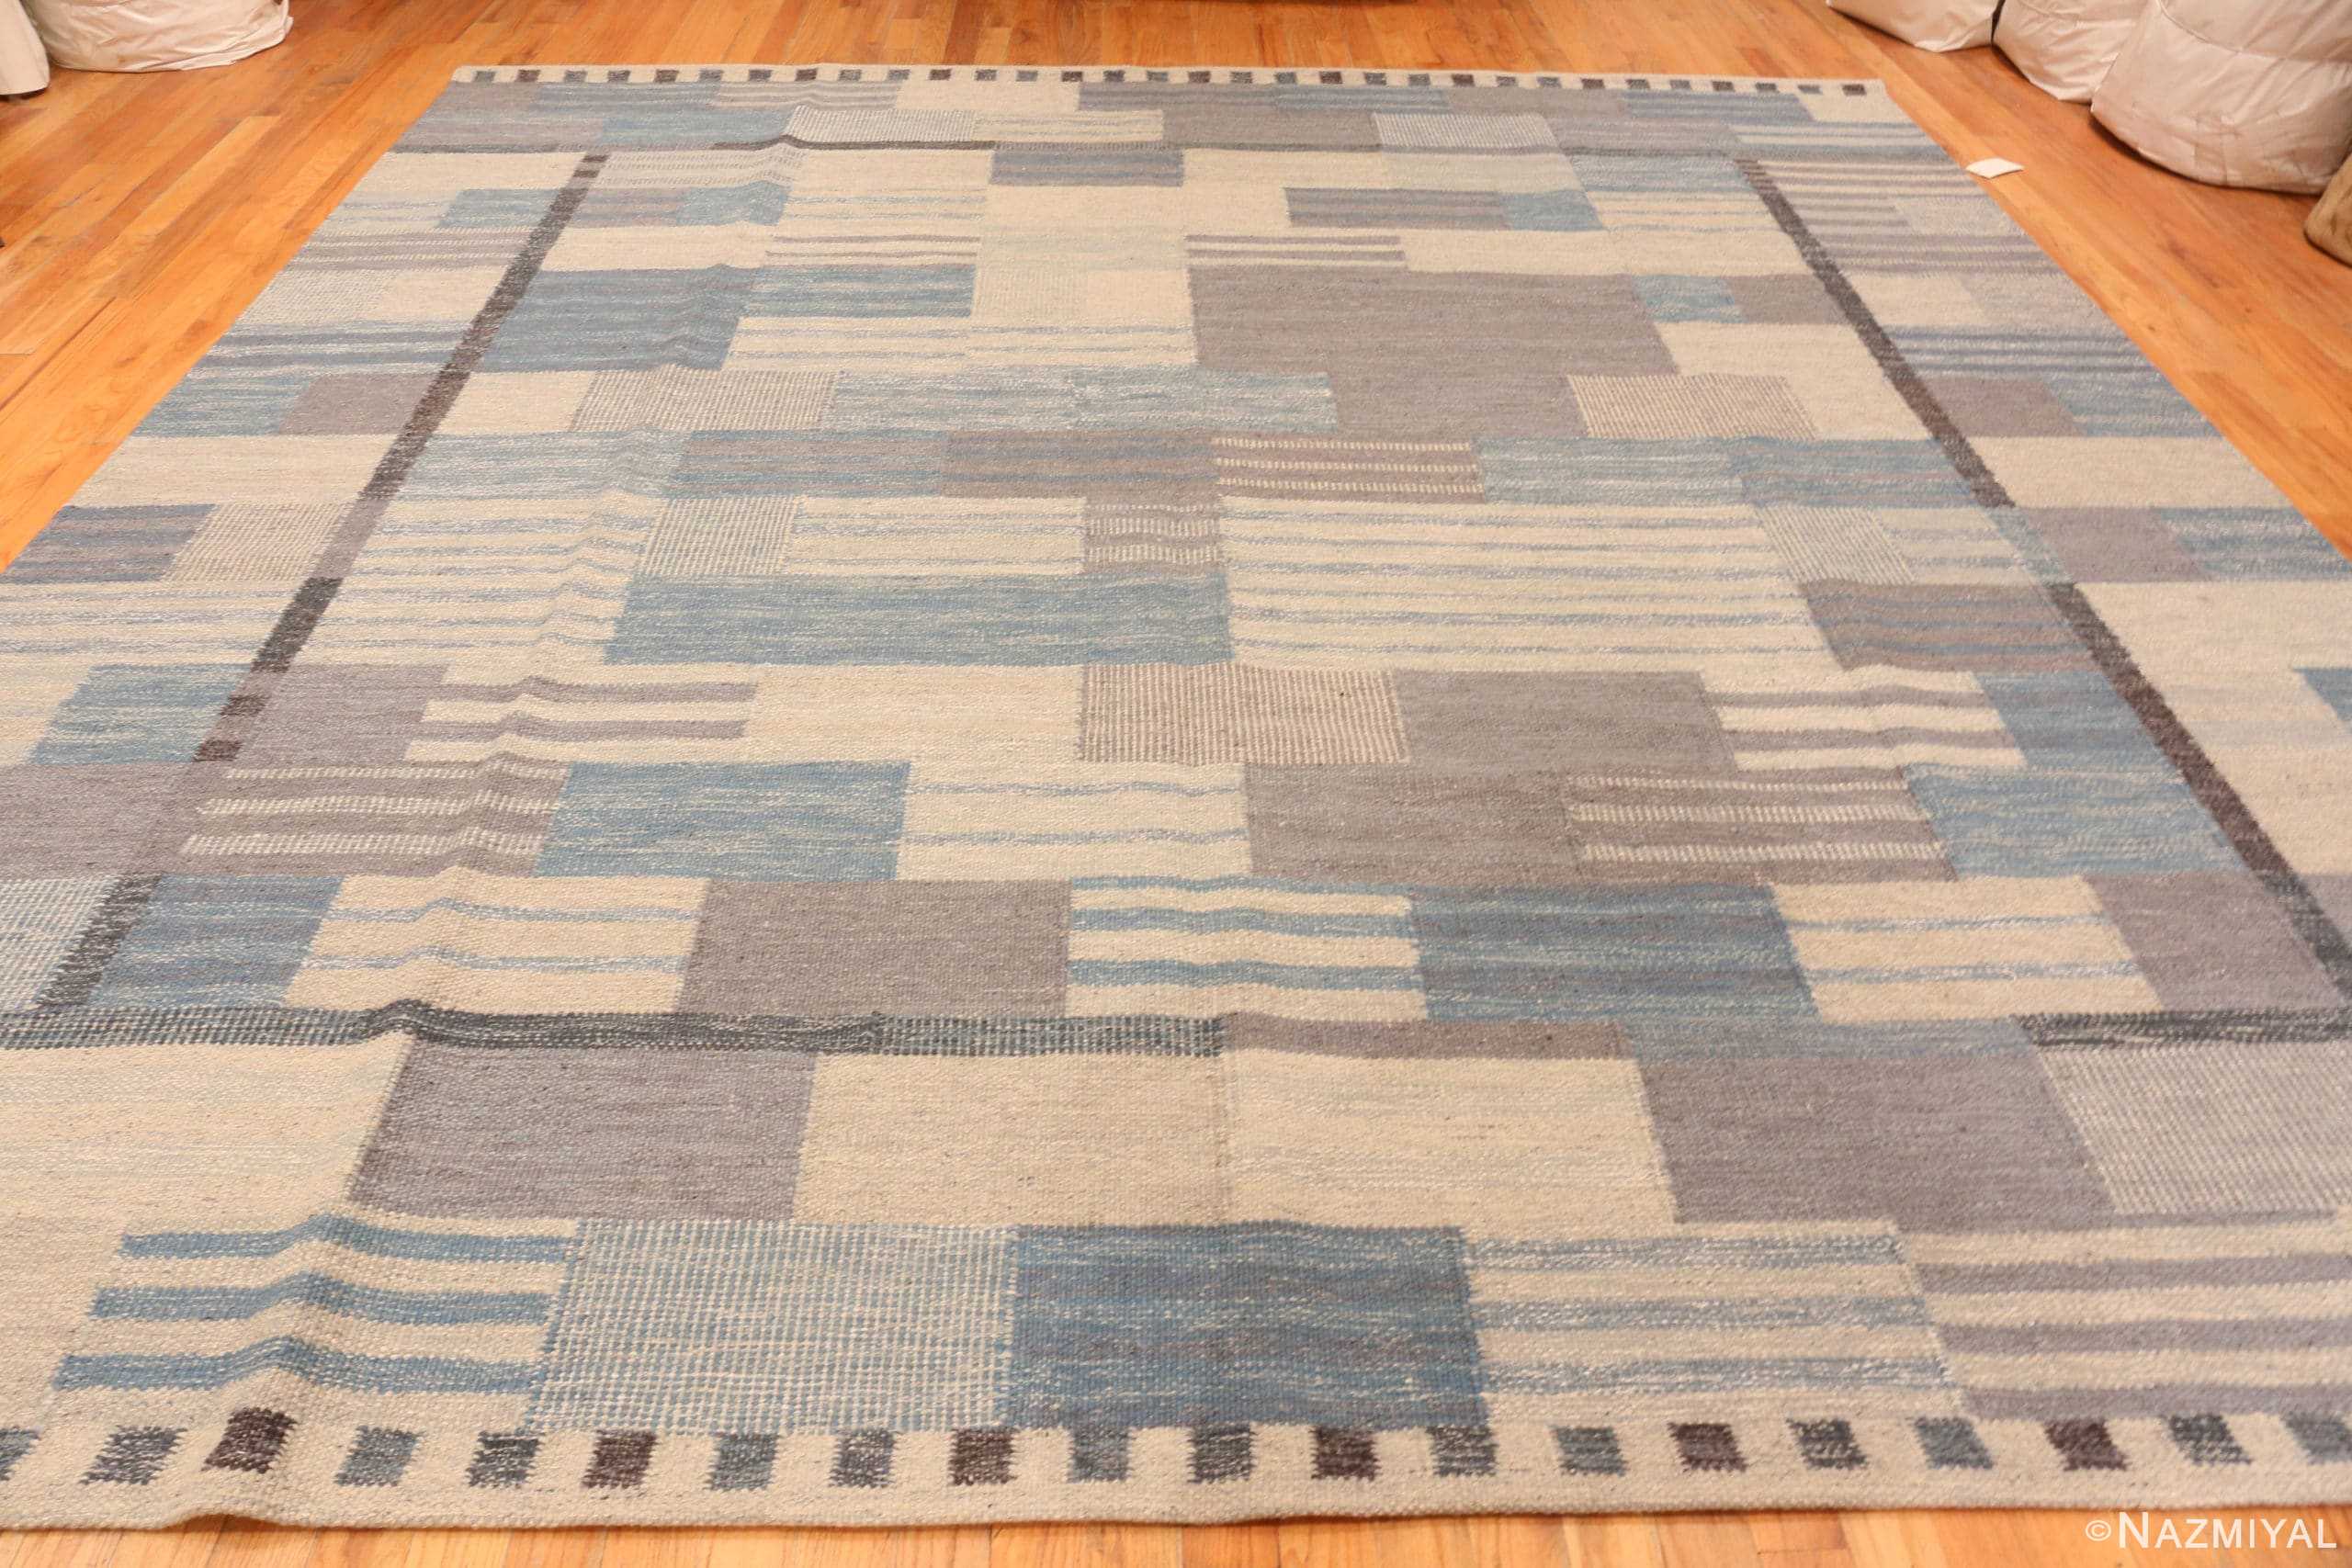 Whole View Of Square Modern Geometric Swedish Inspired Flat Woven Area Rug 60898 by Nazmiyal Antique Rugs